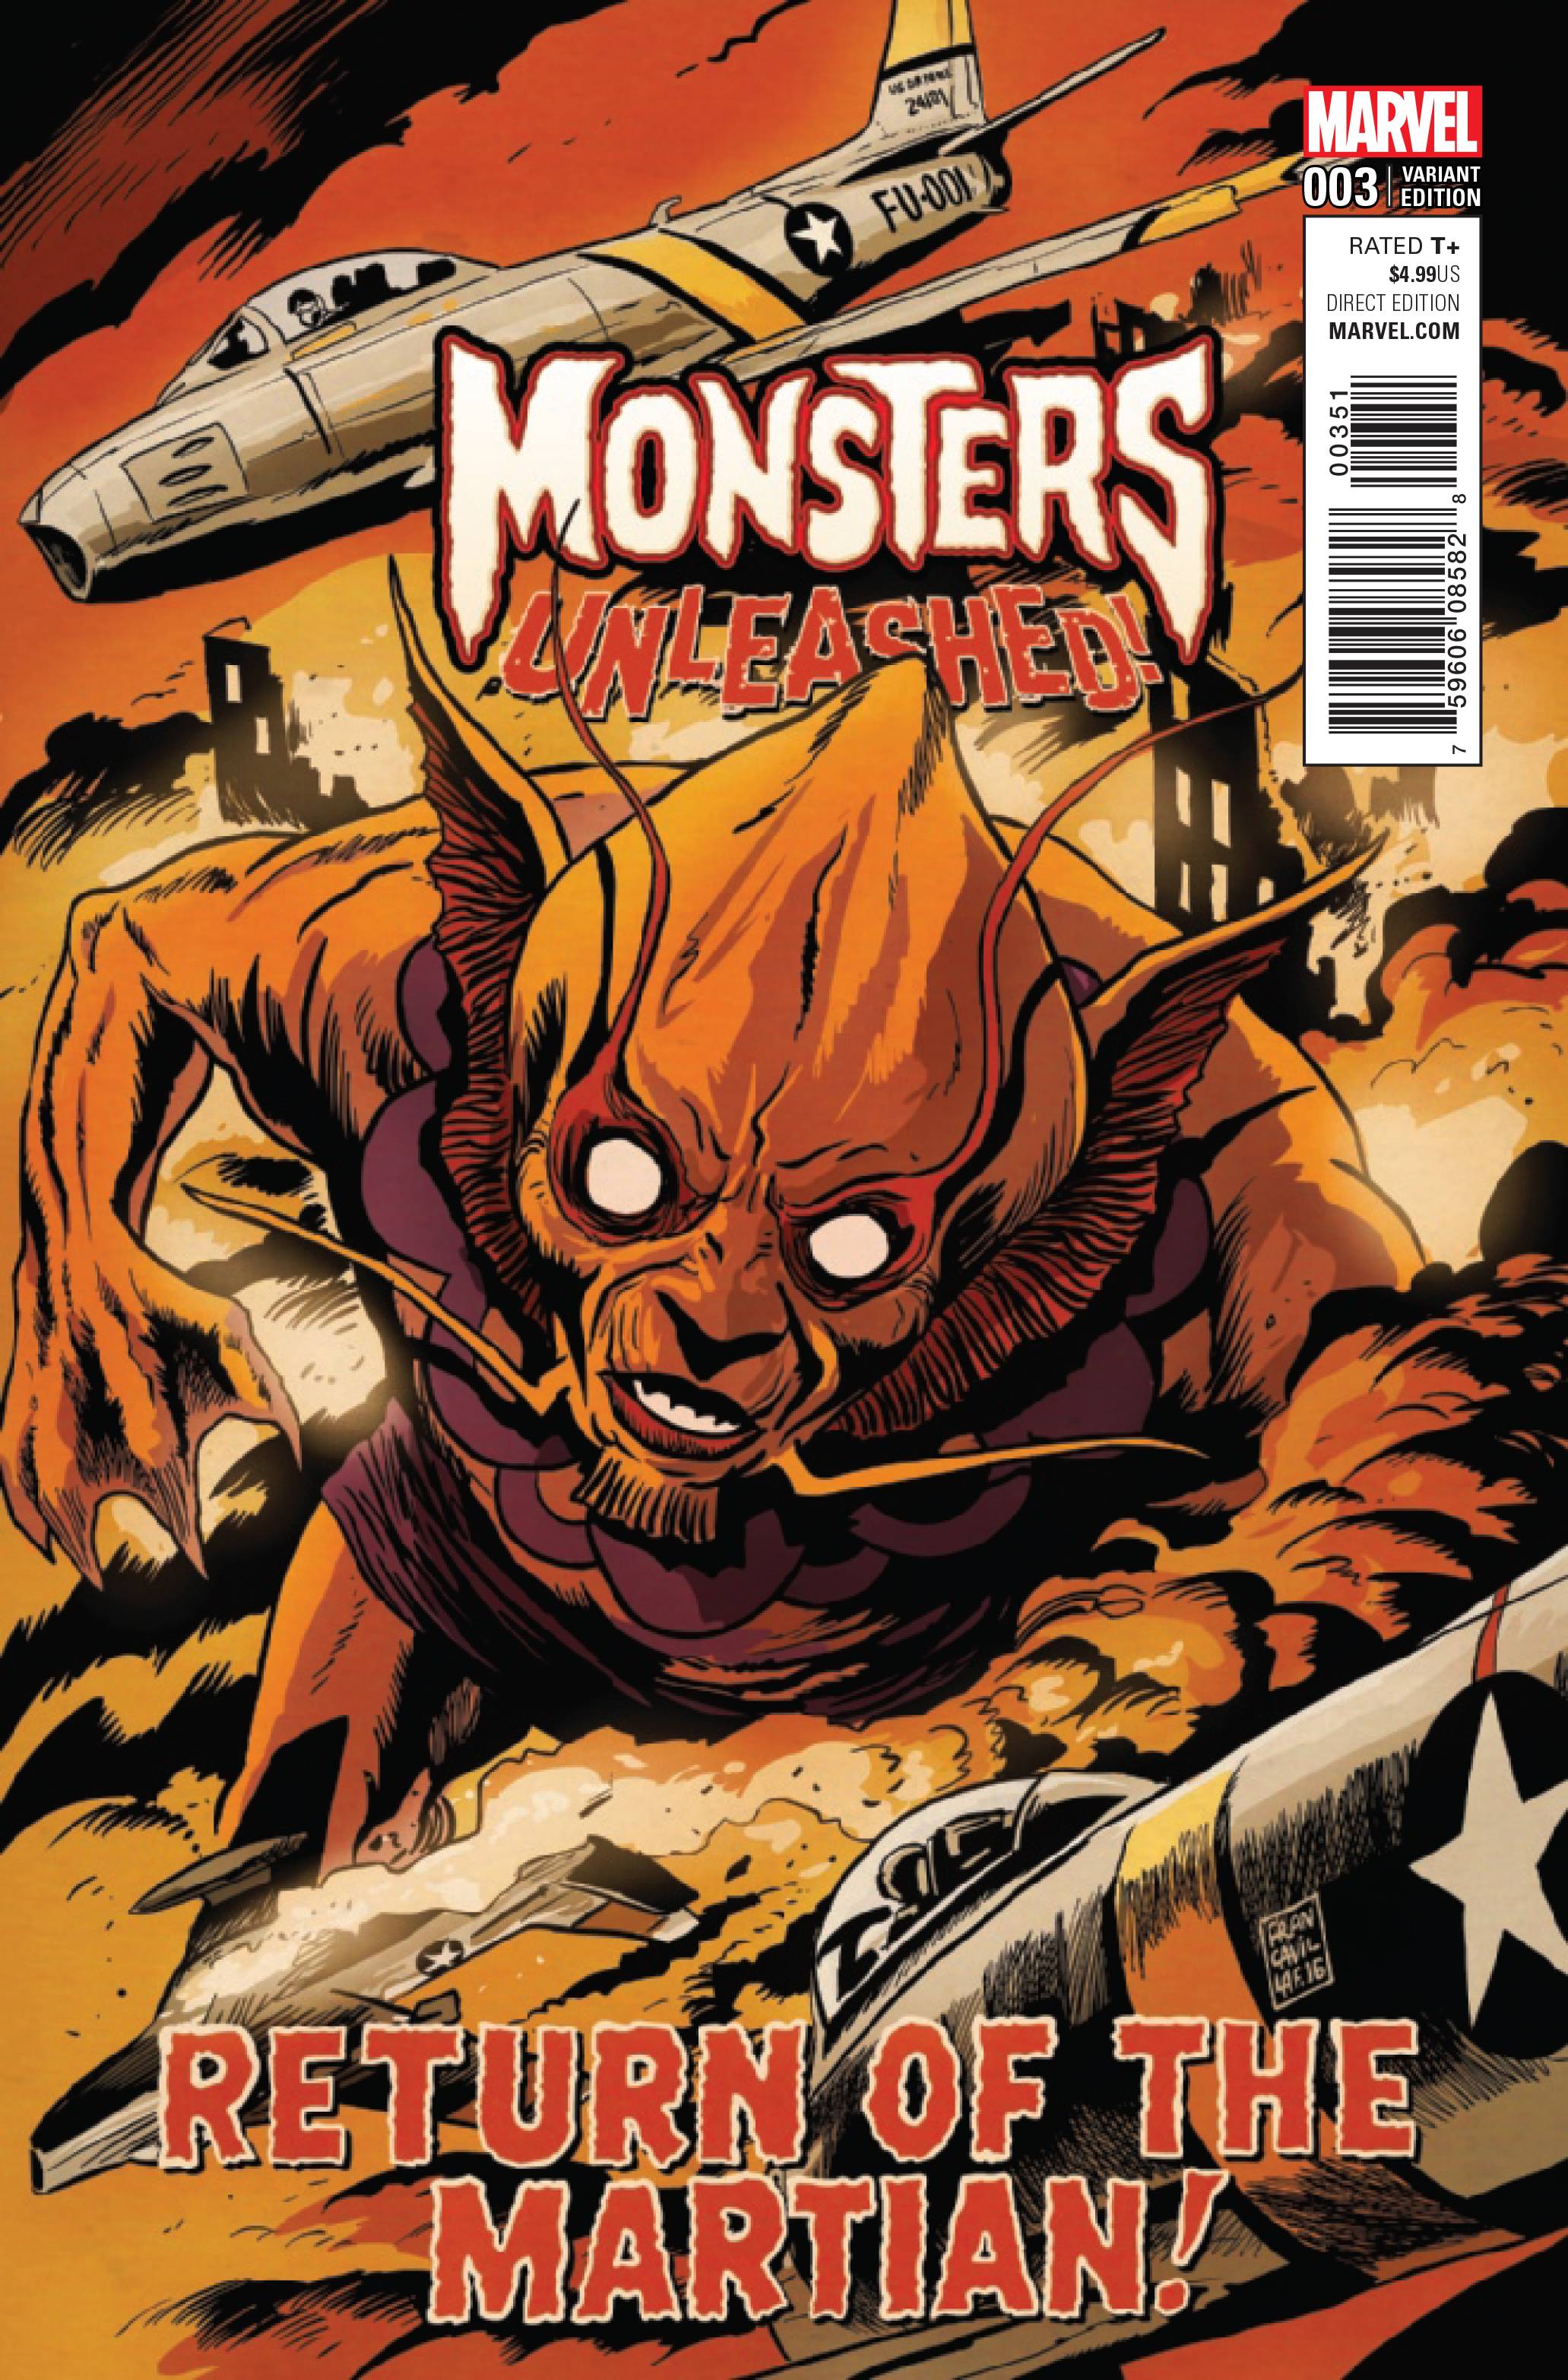 MONSTERS UNLEASHED #3